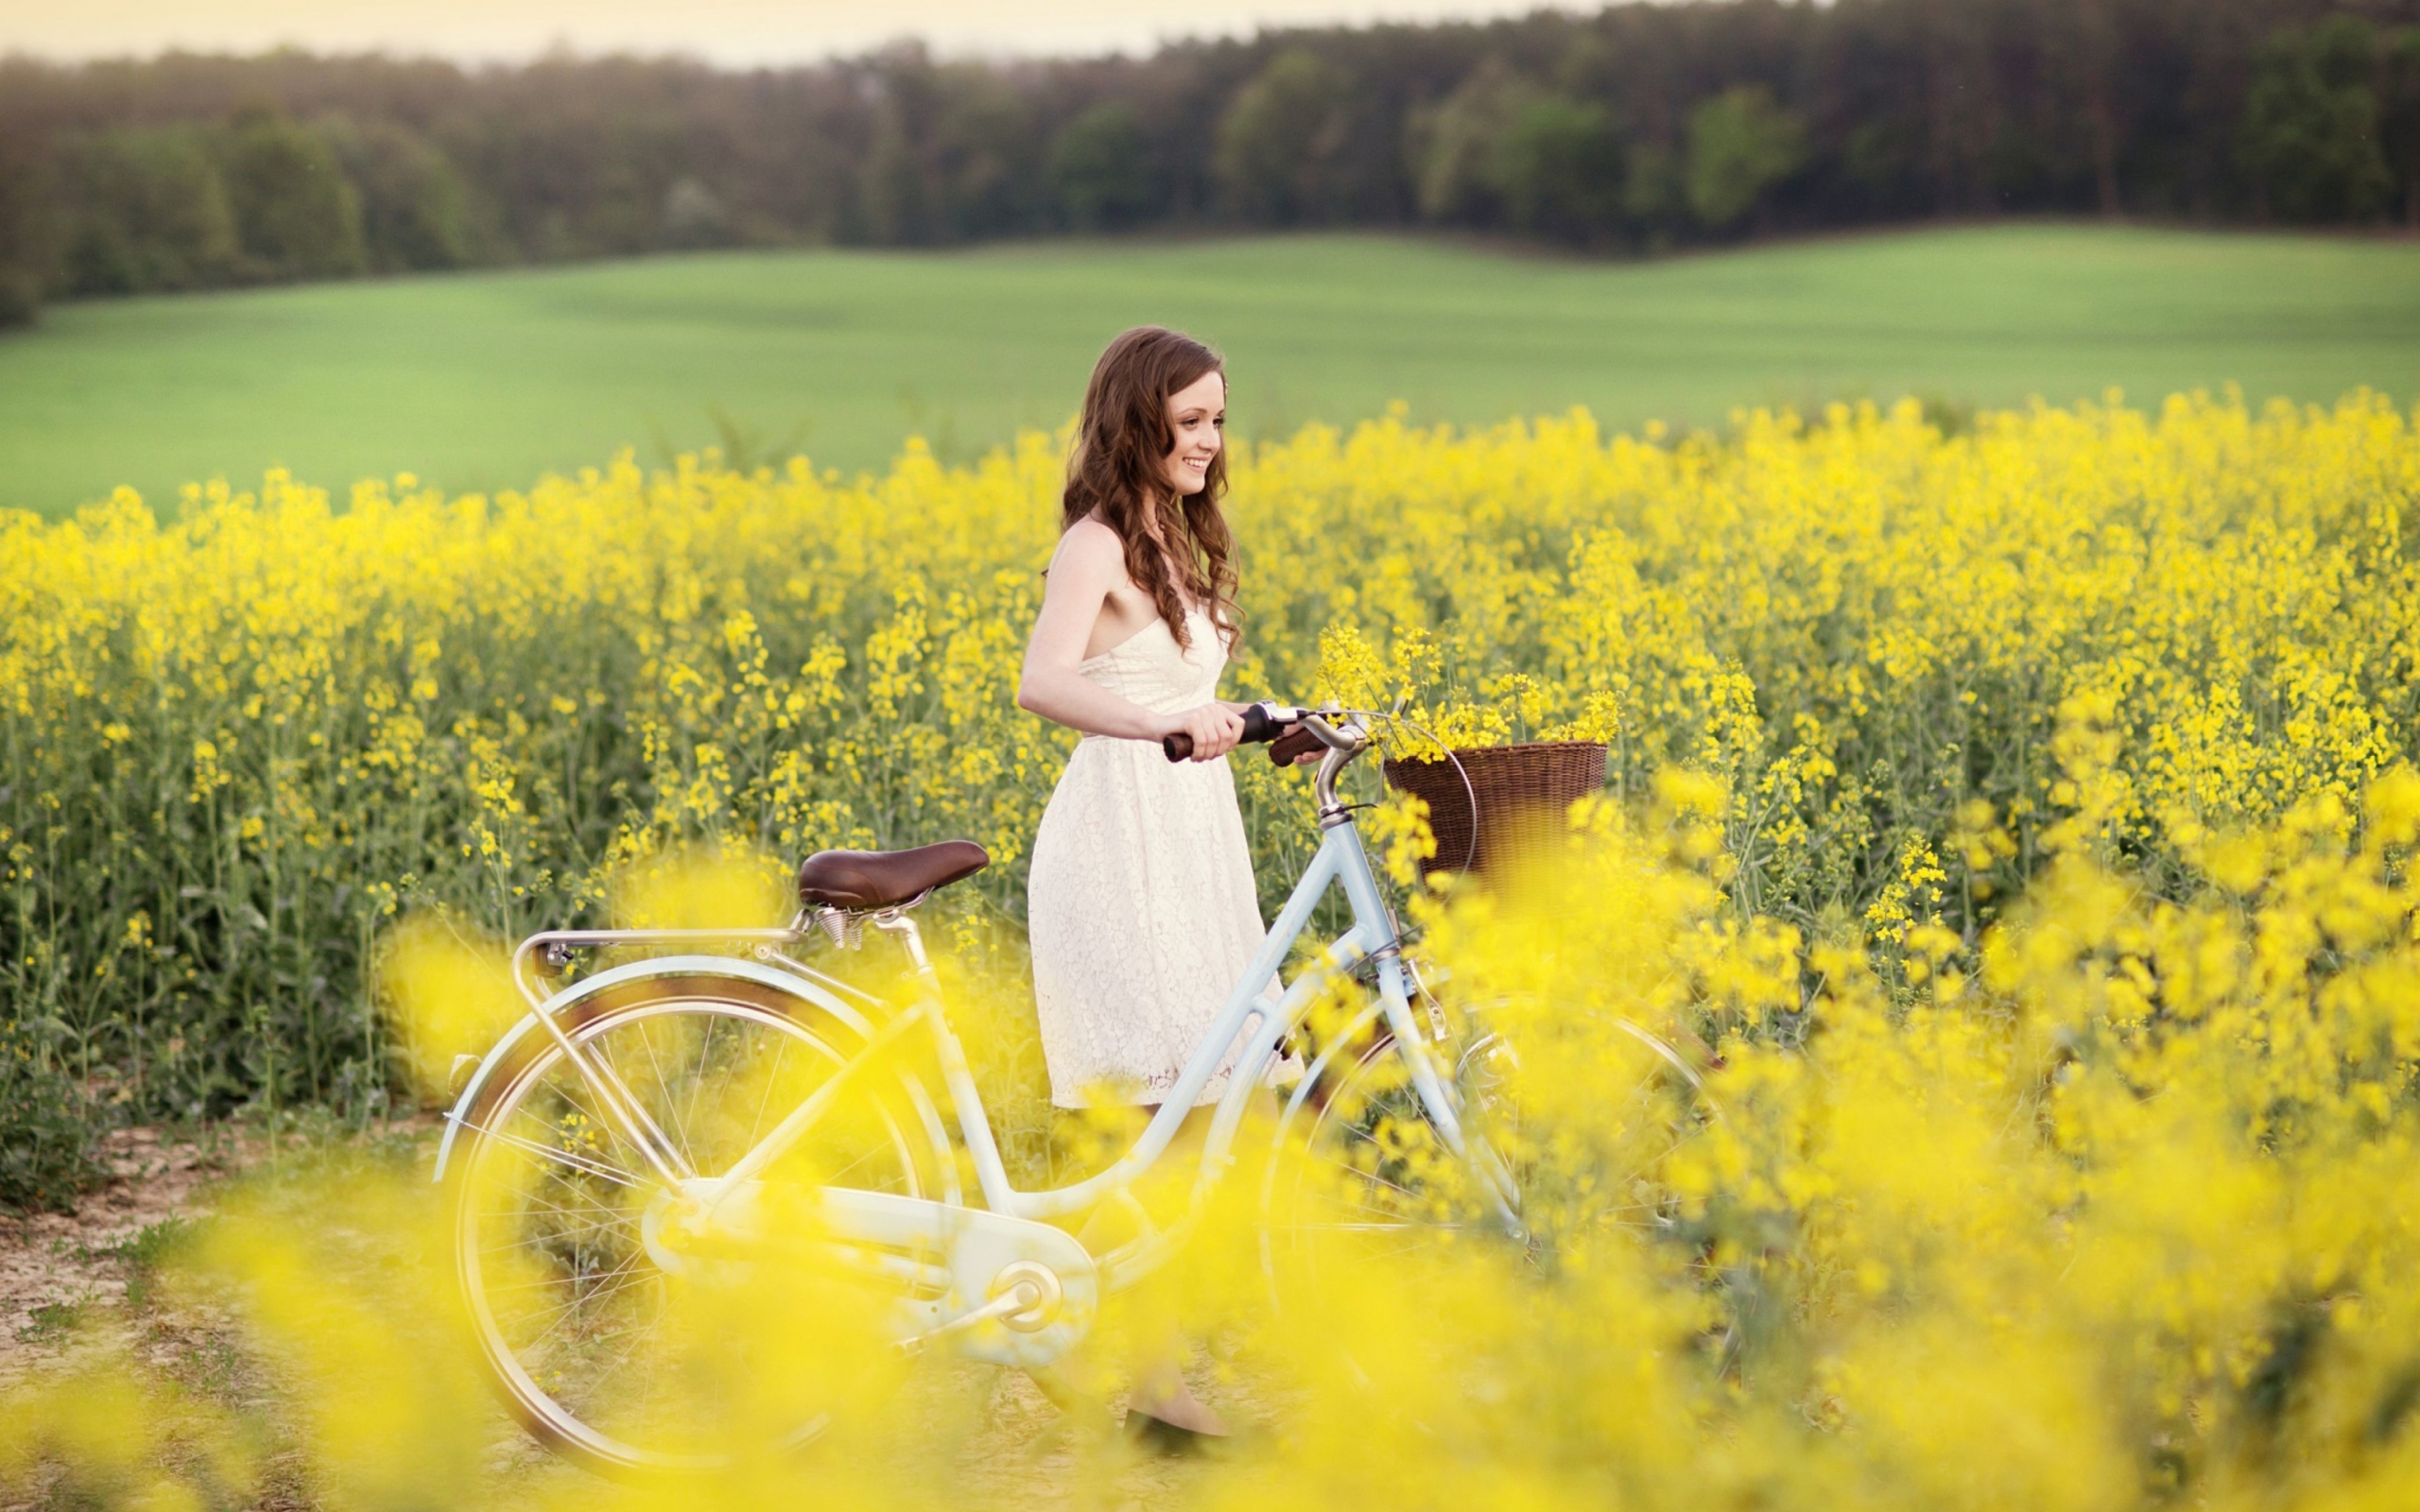 Girl With Bicycle In Yellow Field wallpaper 2560x1600